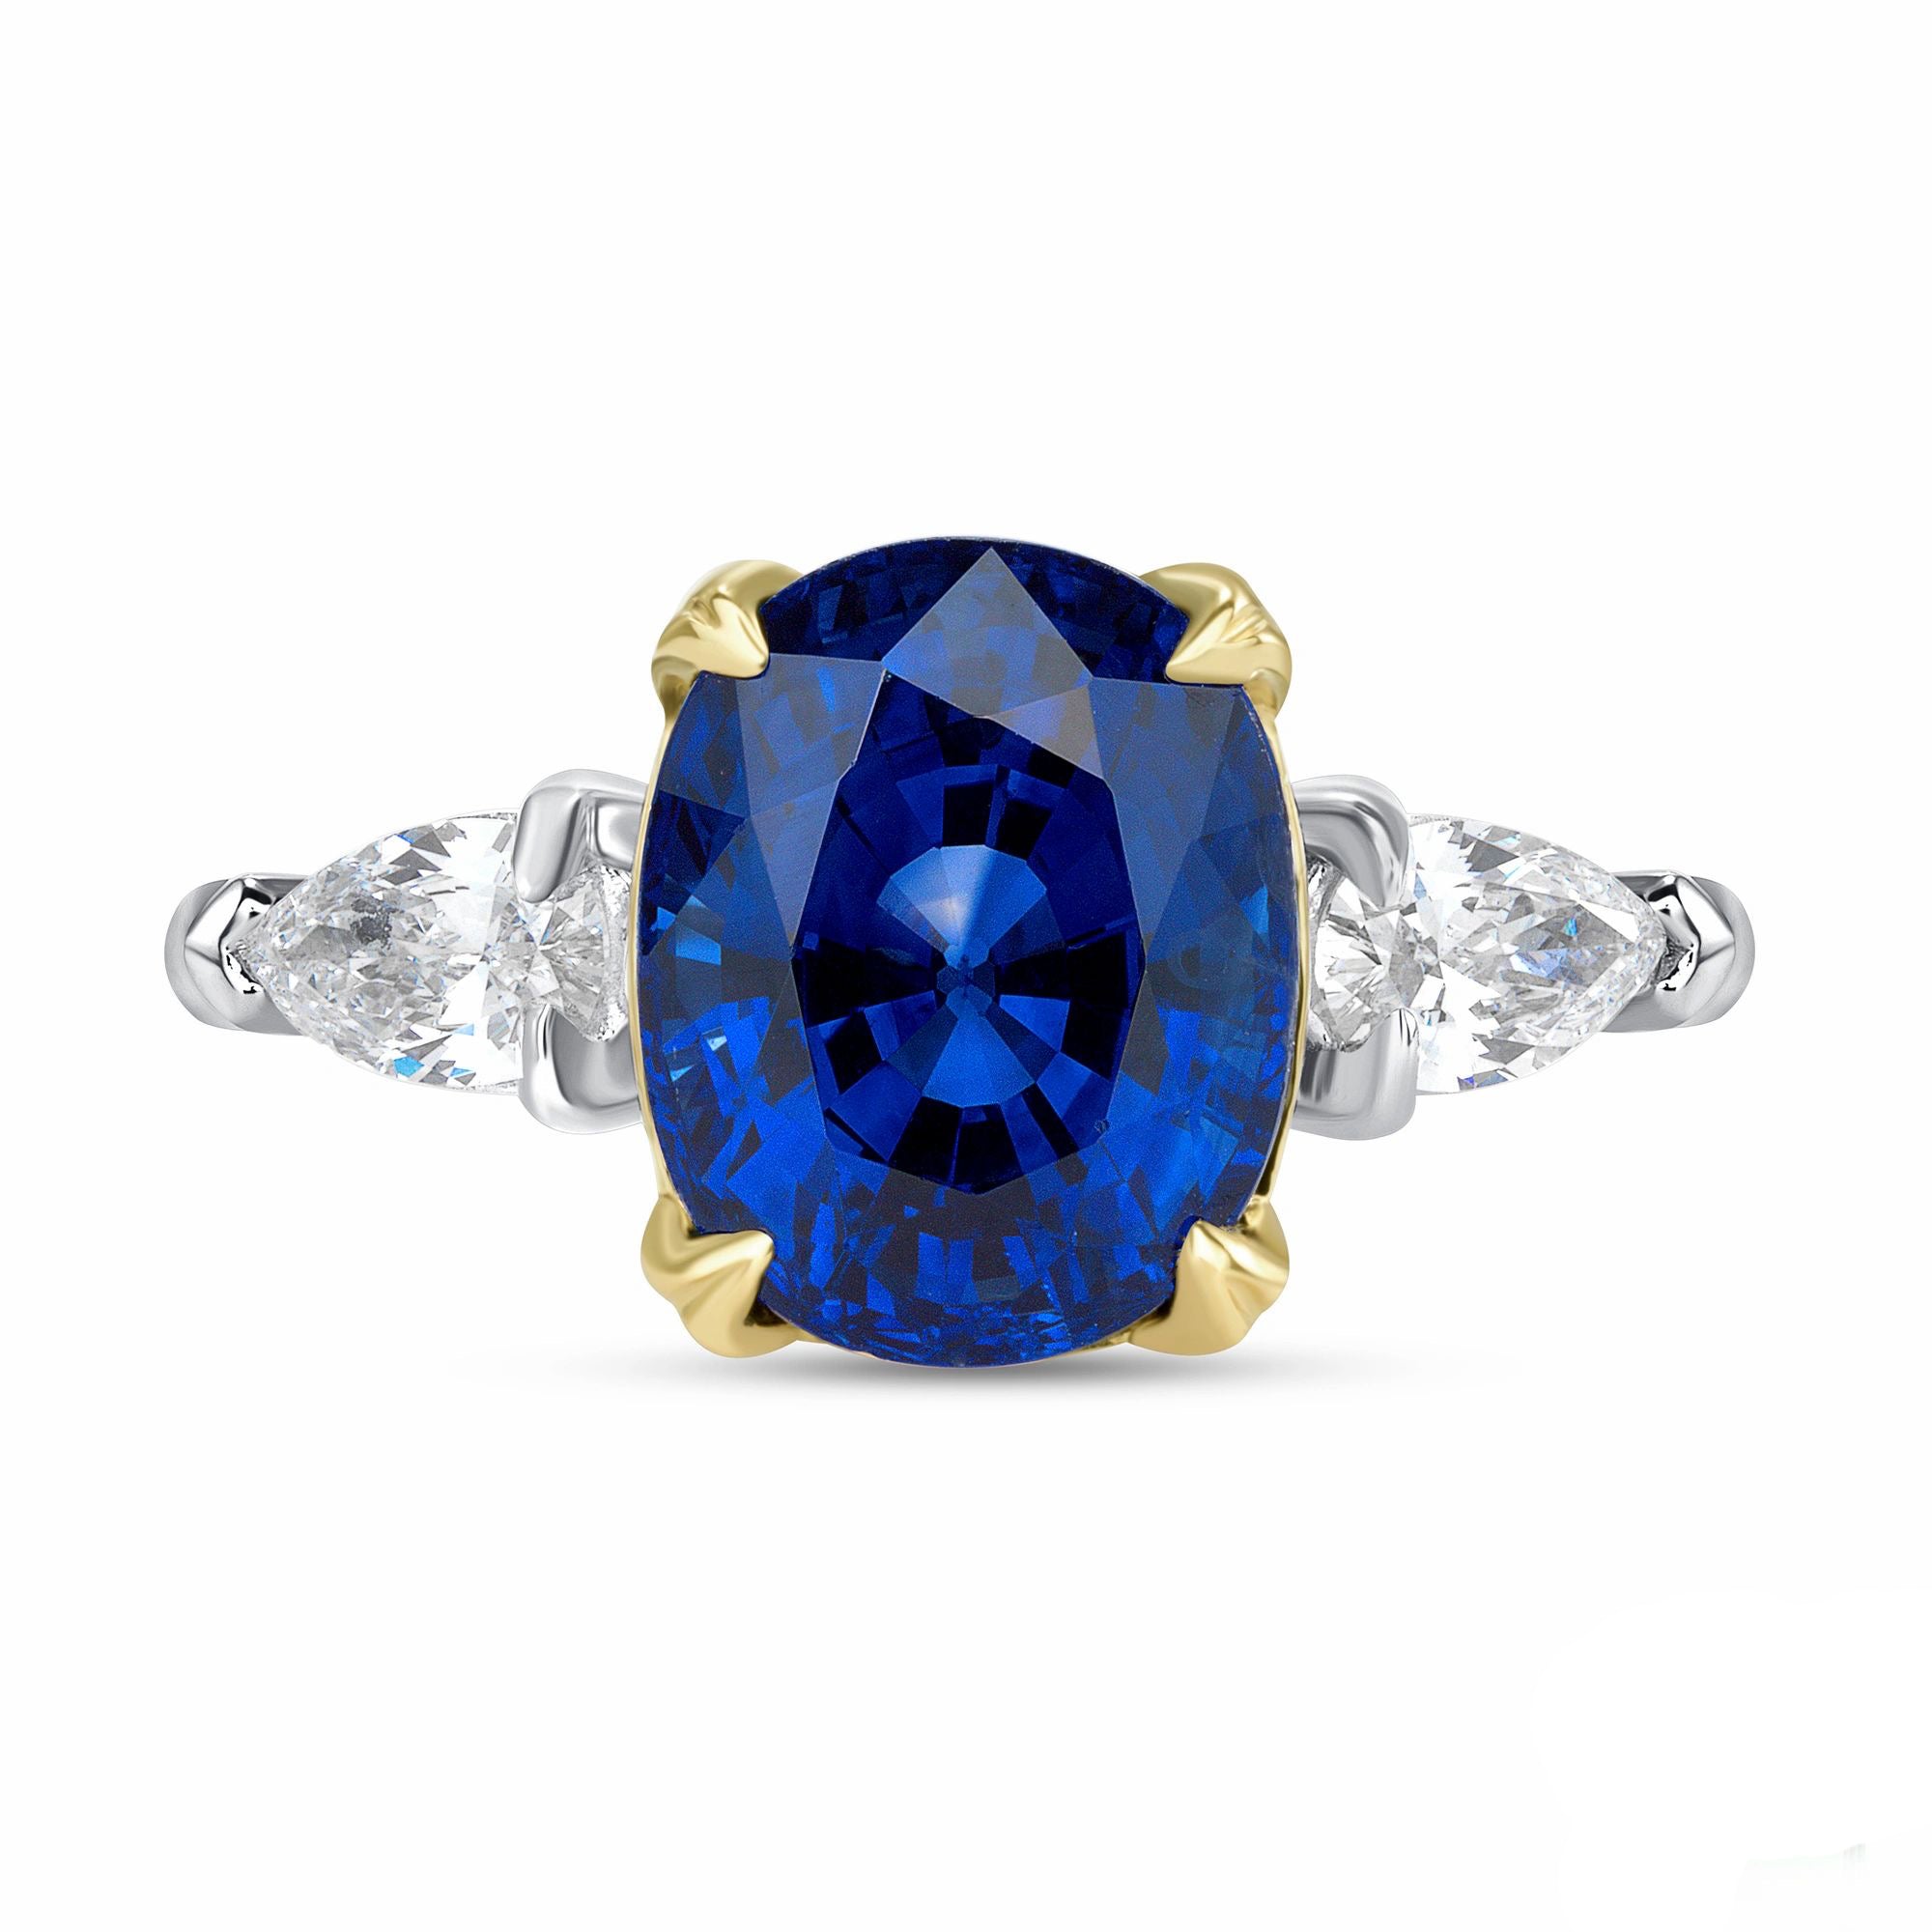 Blue Sapphire, Platinum and 18k Yellow Gold Ring - Talisman Collection Fine Jewelers